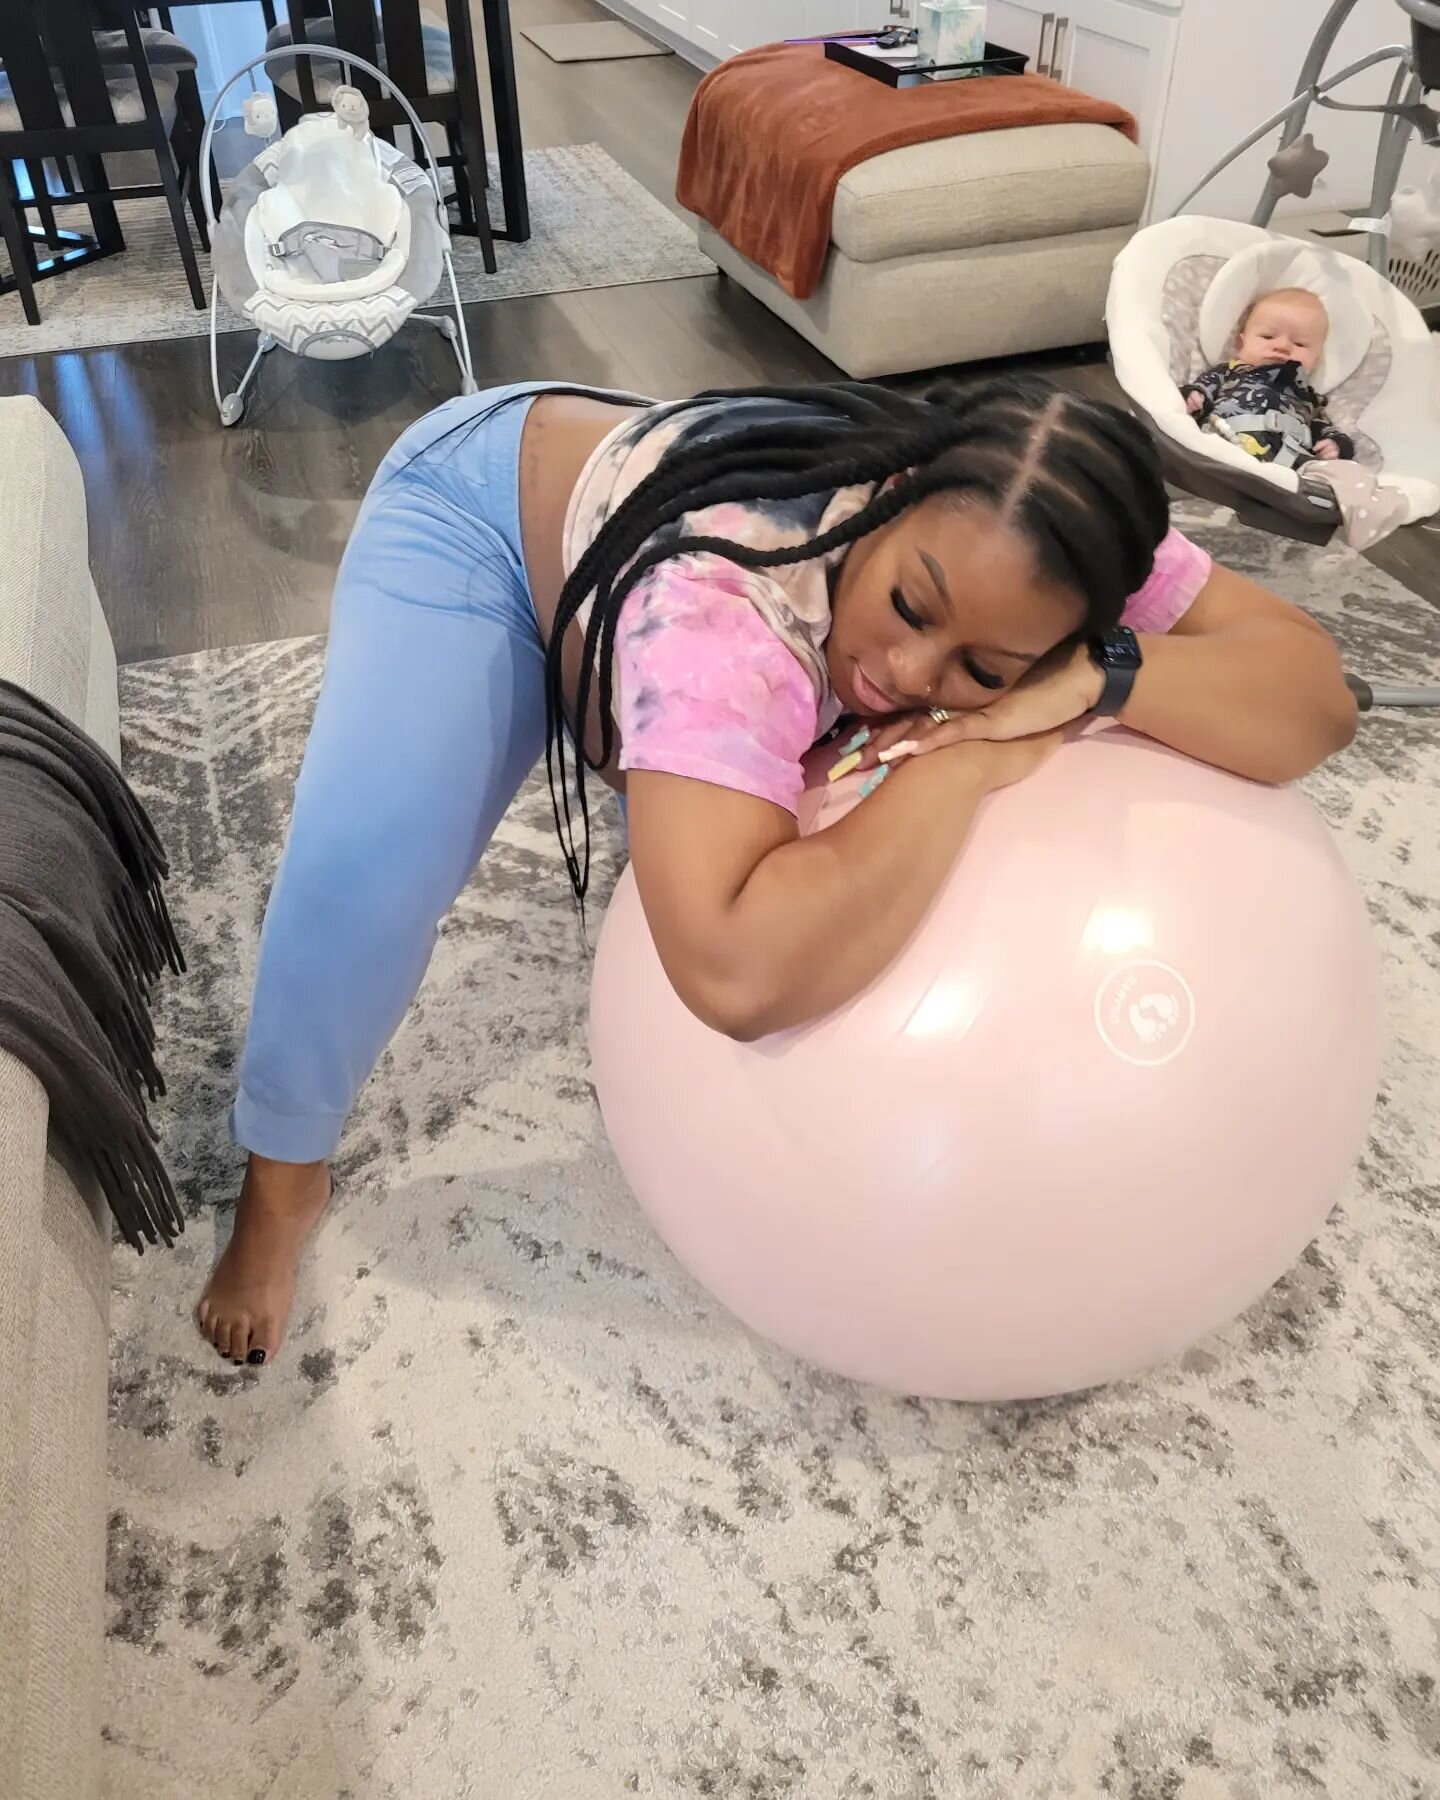 Did you know that my Childbirth class covers the positions you'll want to use during labor? 

Understanding the position of baby in relation to your pelvis is so useful when aiming for an efficient labor process! Here my client is opening the midpelv